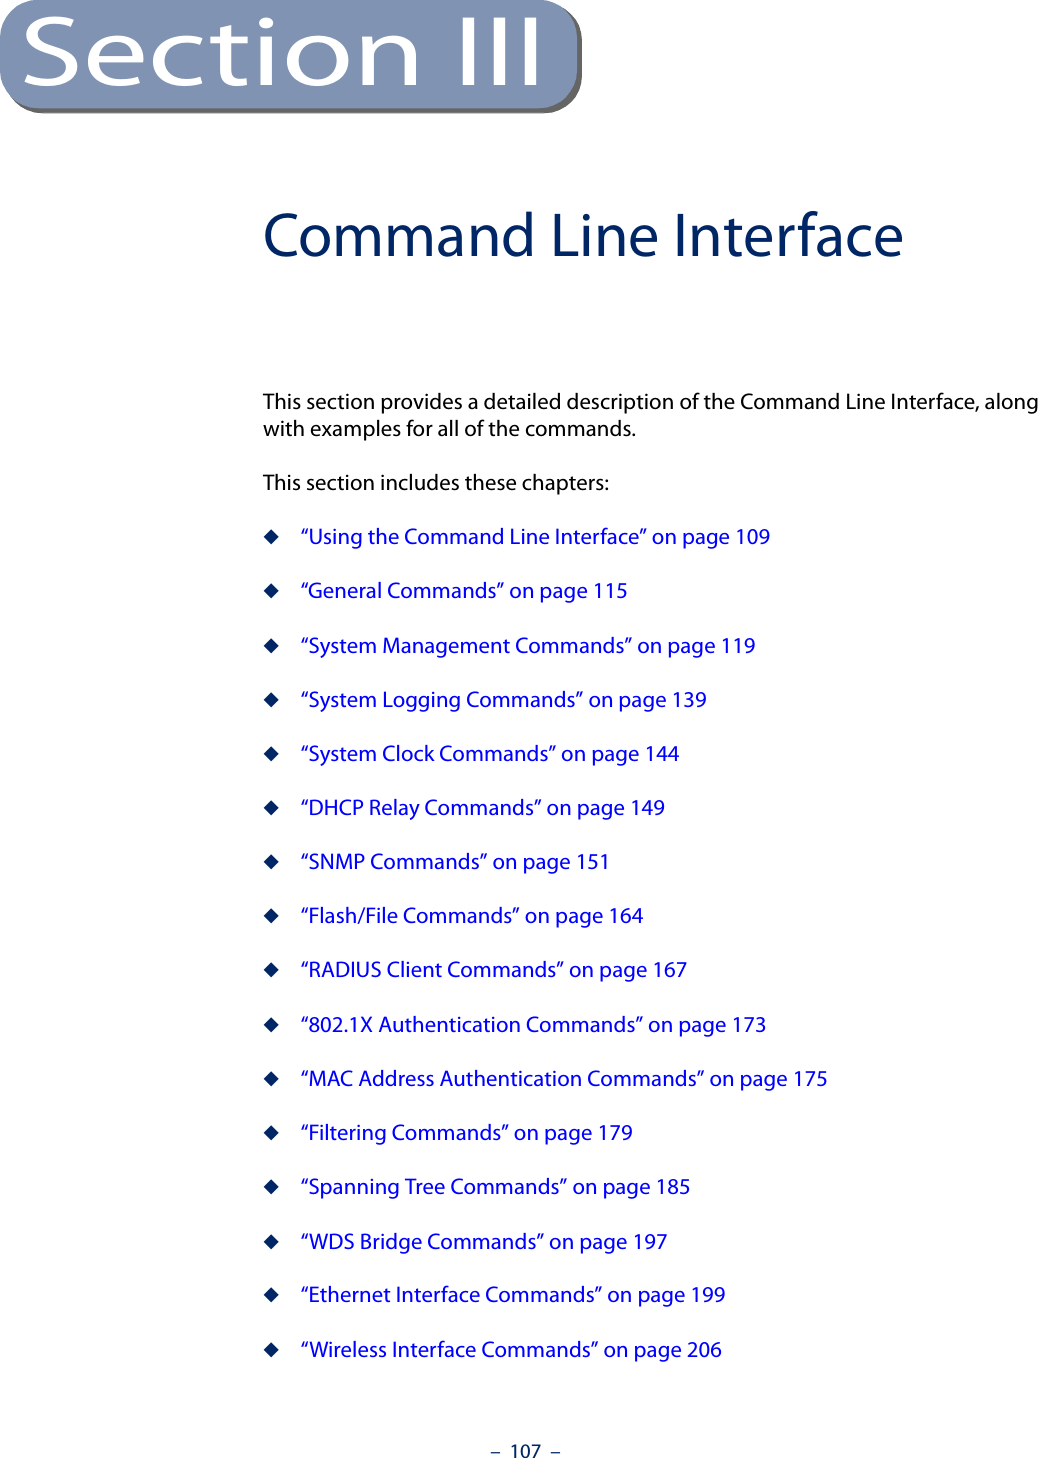 –  107  –Section IIICommand Line InterfaceThis section provides a detailed description of the Command Line Interface, along with examples for all of the commands. This section includes these chapters:◆“Using the Command Line Interface” on page 109◆“General Commands” on page 115◆“System Management Commands” on page 119◆“System Logging Commands” on page 139◆“System Clock Commands” on page 144◆“DHCP Relay Commands” on page 149◆“SNMP Commands” on page 151◆“Flash/File Commands” on page 164◆“RADIUS Client Commands” on page 167◆“802.1X Authentication Commands” on page 173◆“MAC Address Authentication Commands” on page 175◆“Filtering Commands” on page 179◆“Spanning Tree Commands” on page 185◆“WDS Bridge Commands” on page 197◆“Ethernet Interface Commands” on page 199◆“Wireless Interface Commands” on page 206